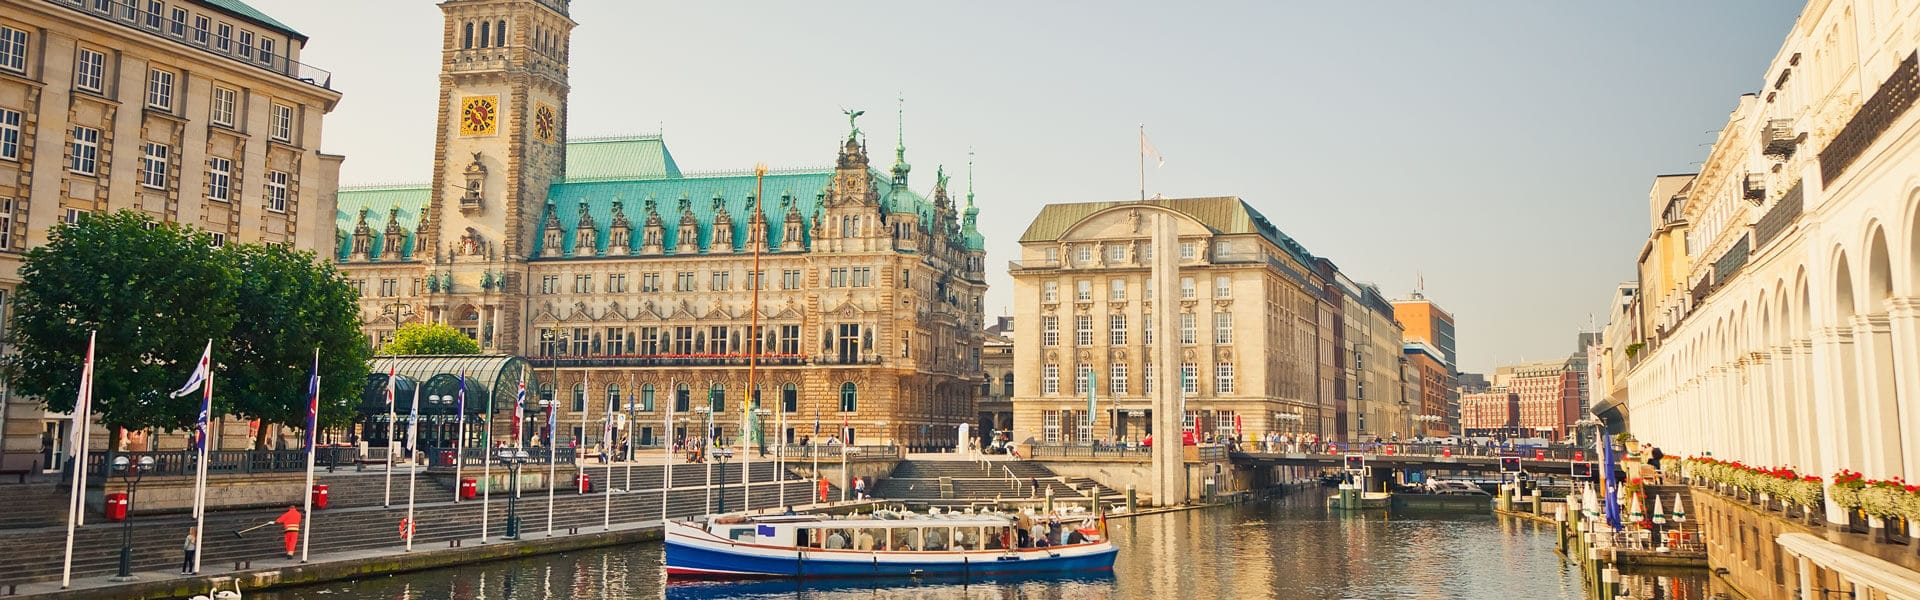 event agency Hamburg - bceed - travel - teambuilding excursions